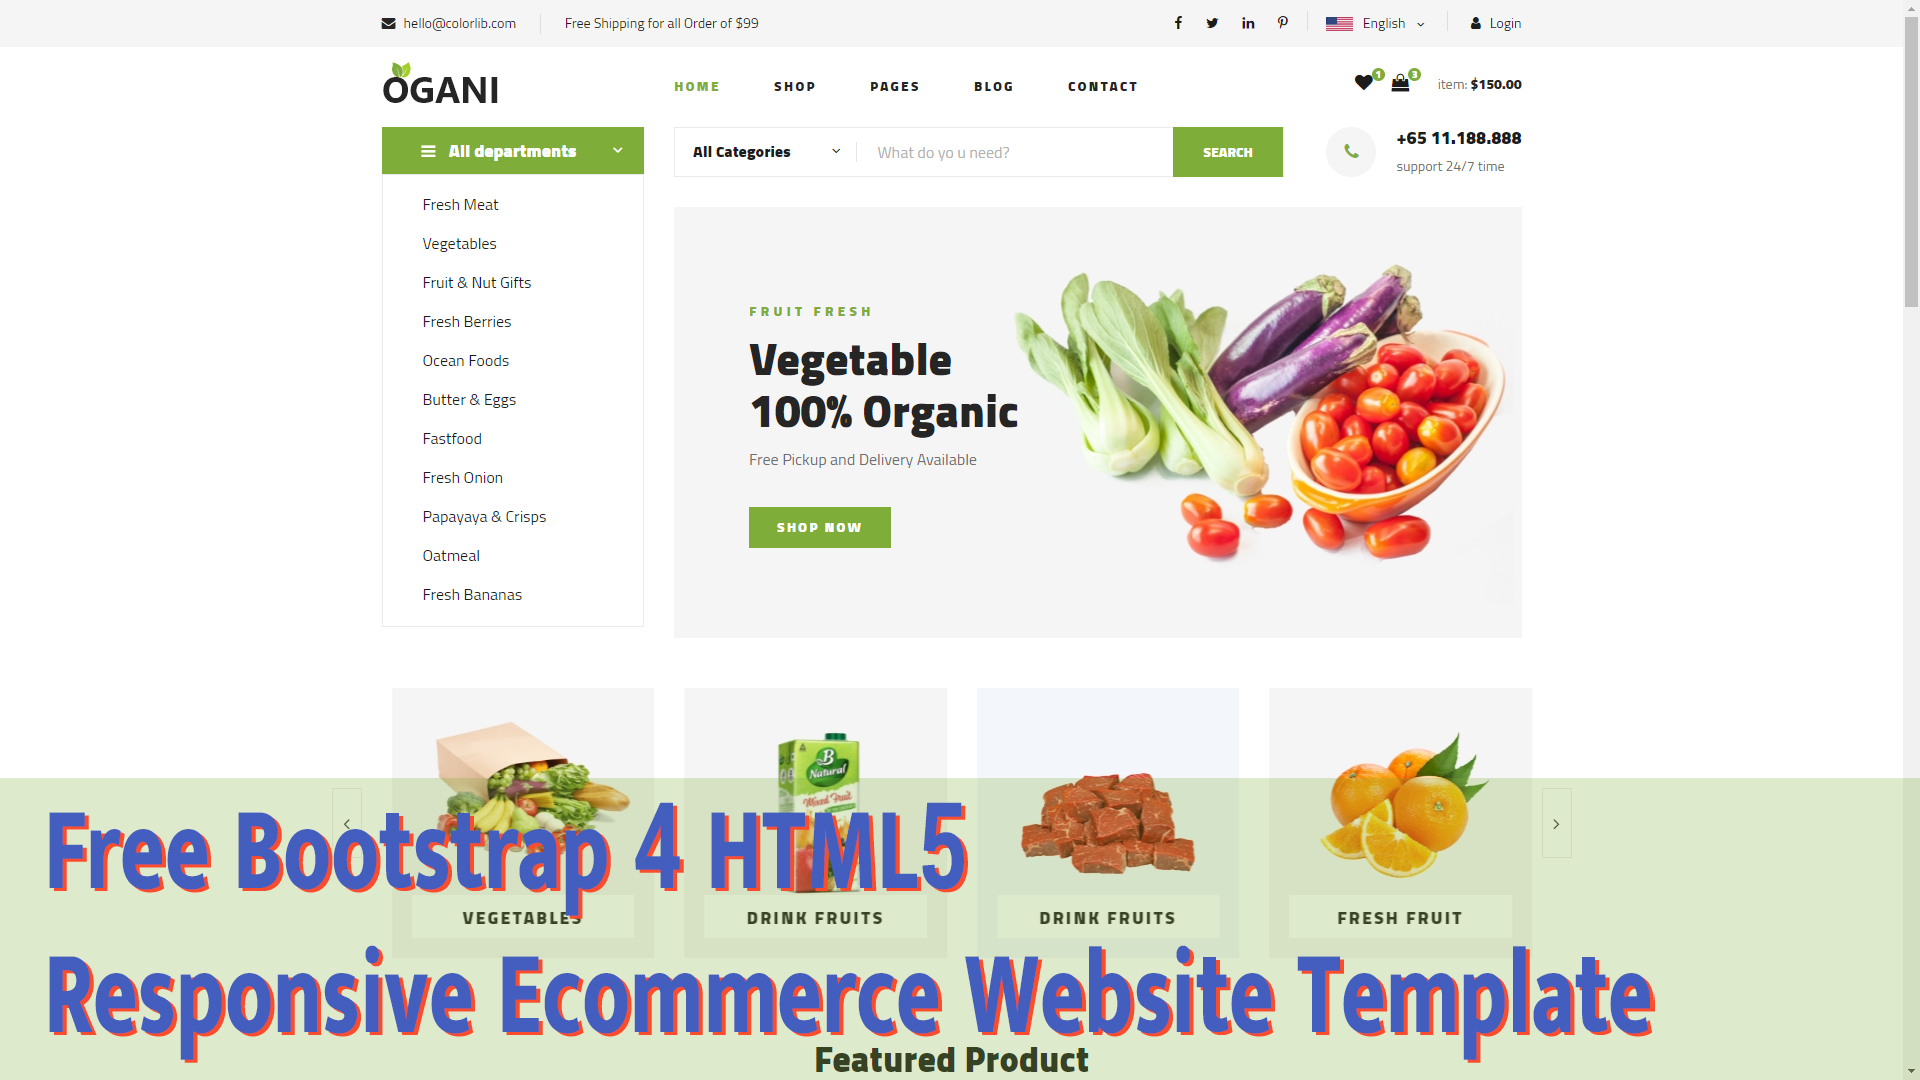 free-bootstrap-4-html5-responsive-ecommerce-website-template